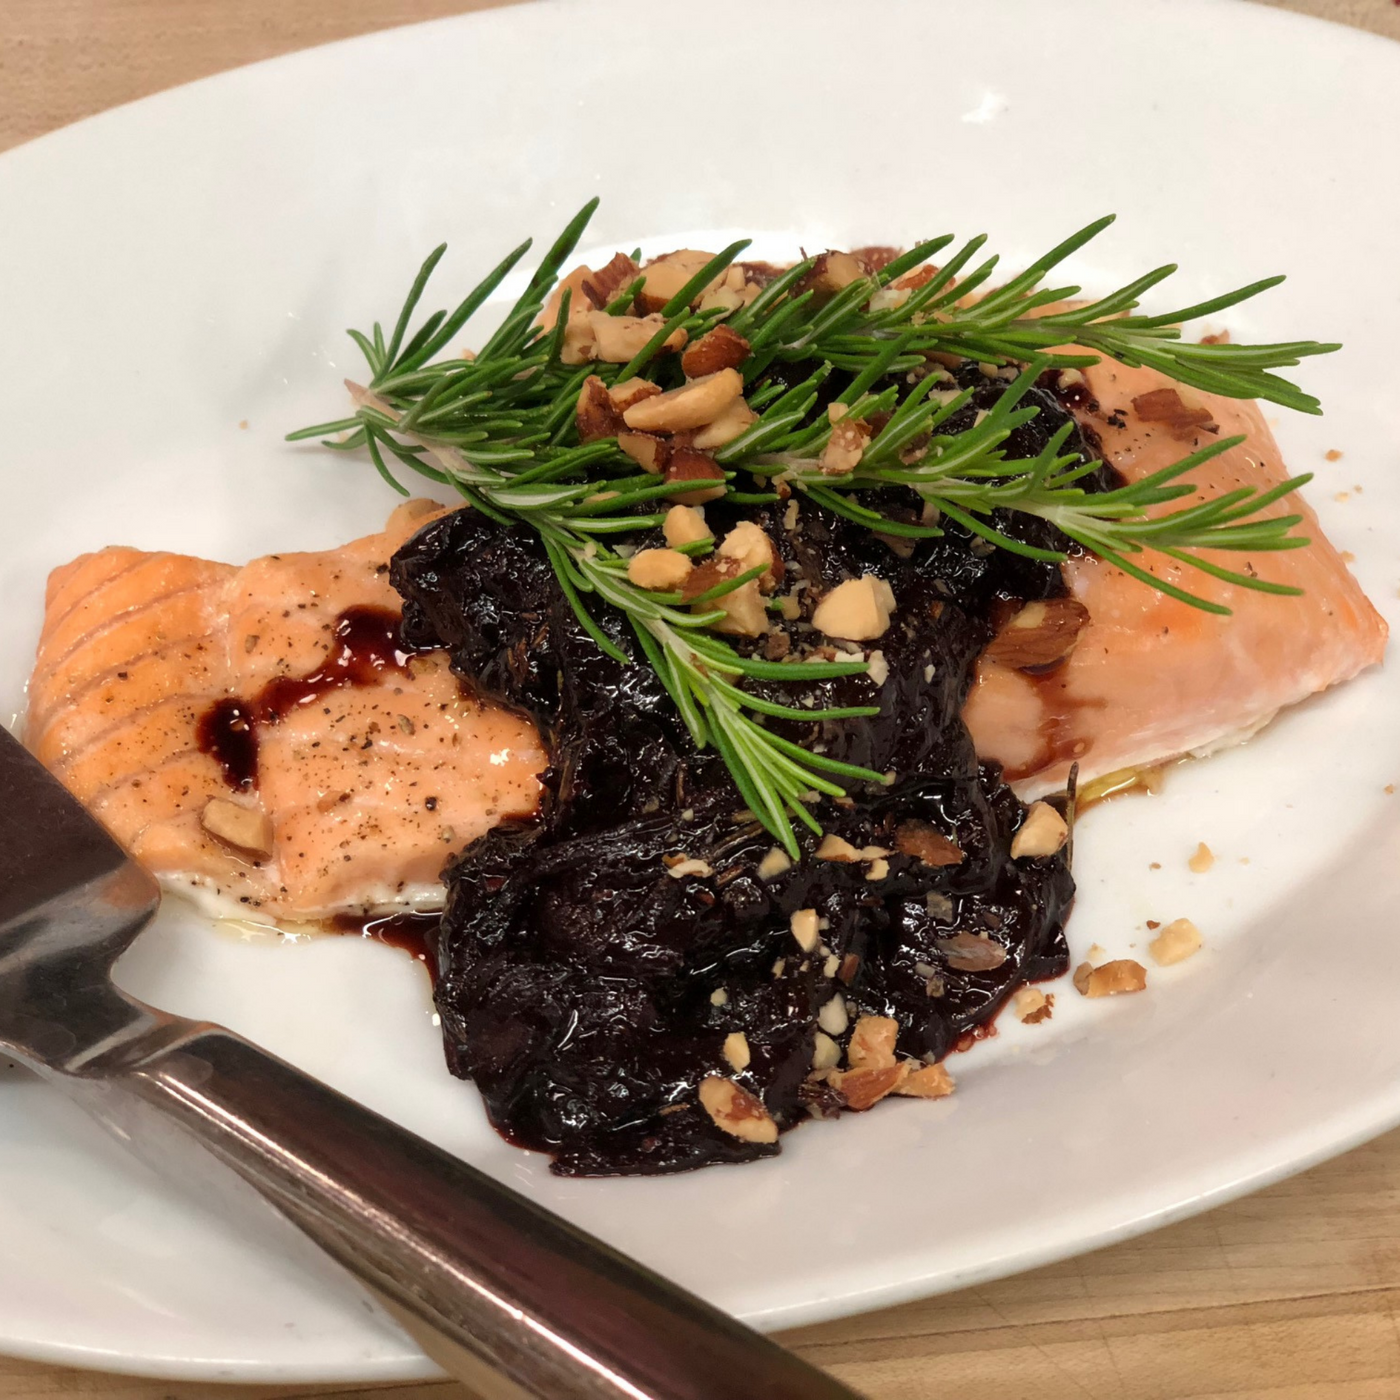 Cedar Plank Roasted Salmon with White Balsamic Cherry Relish and Gremolata: 2 people per meal